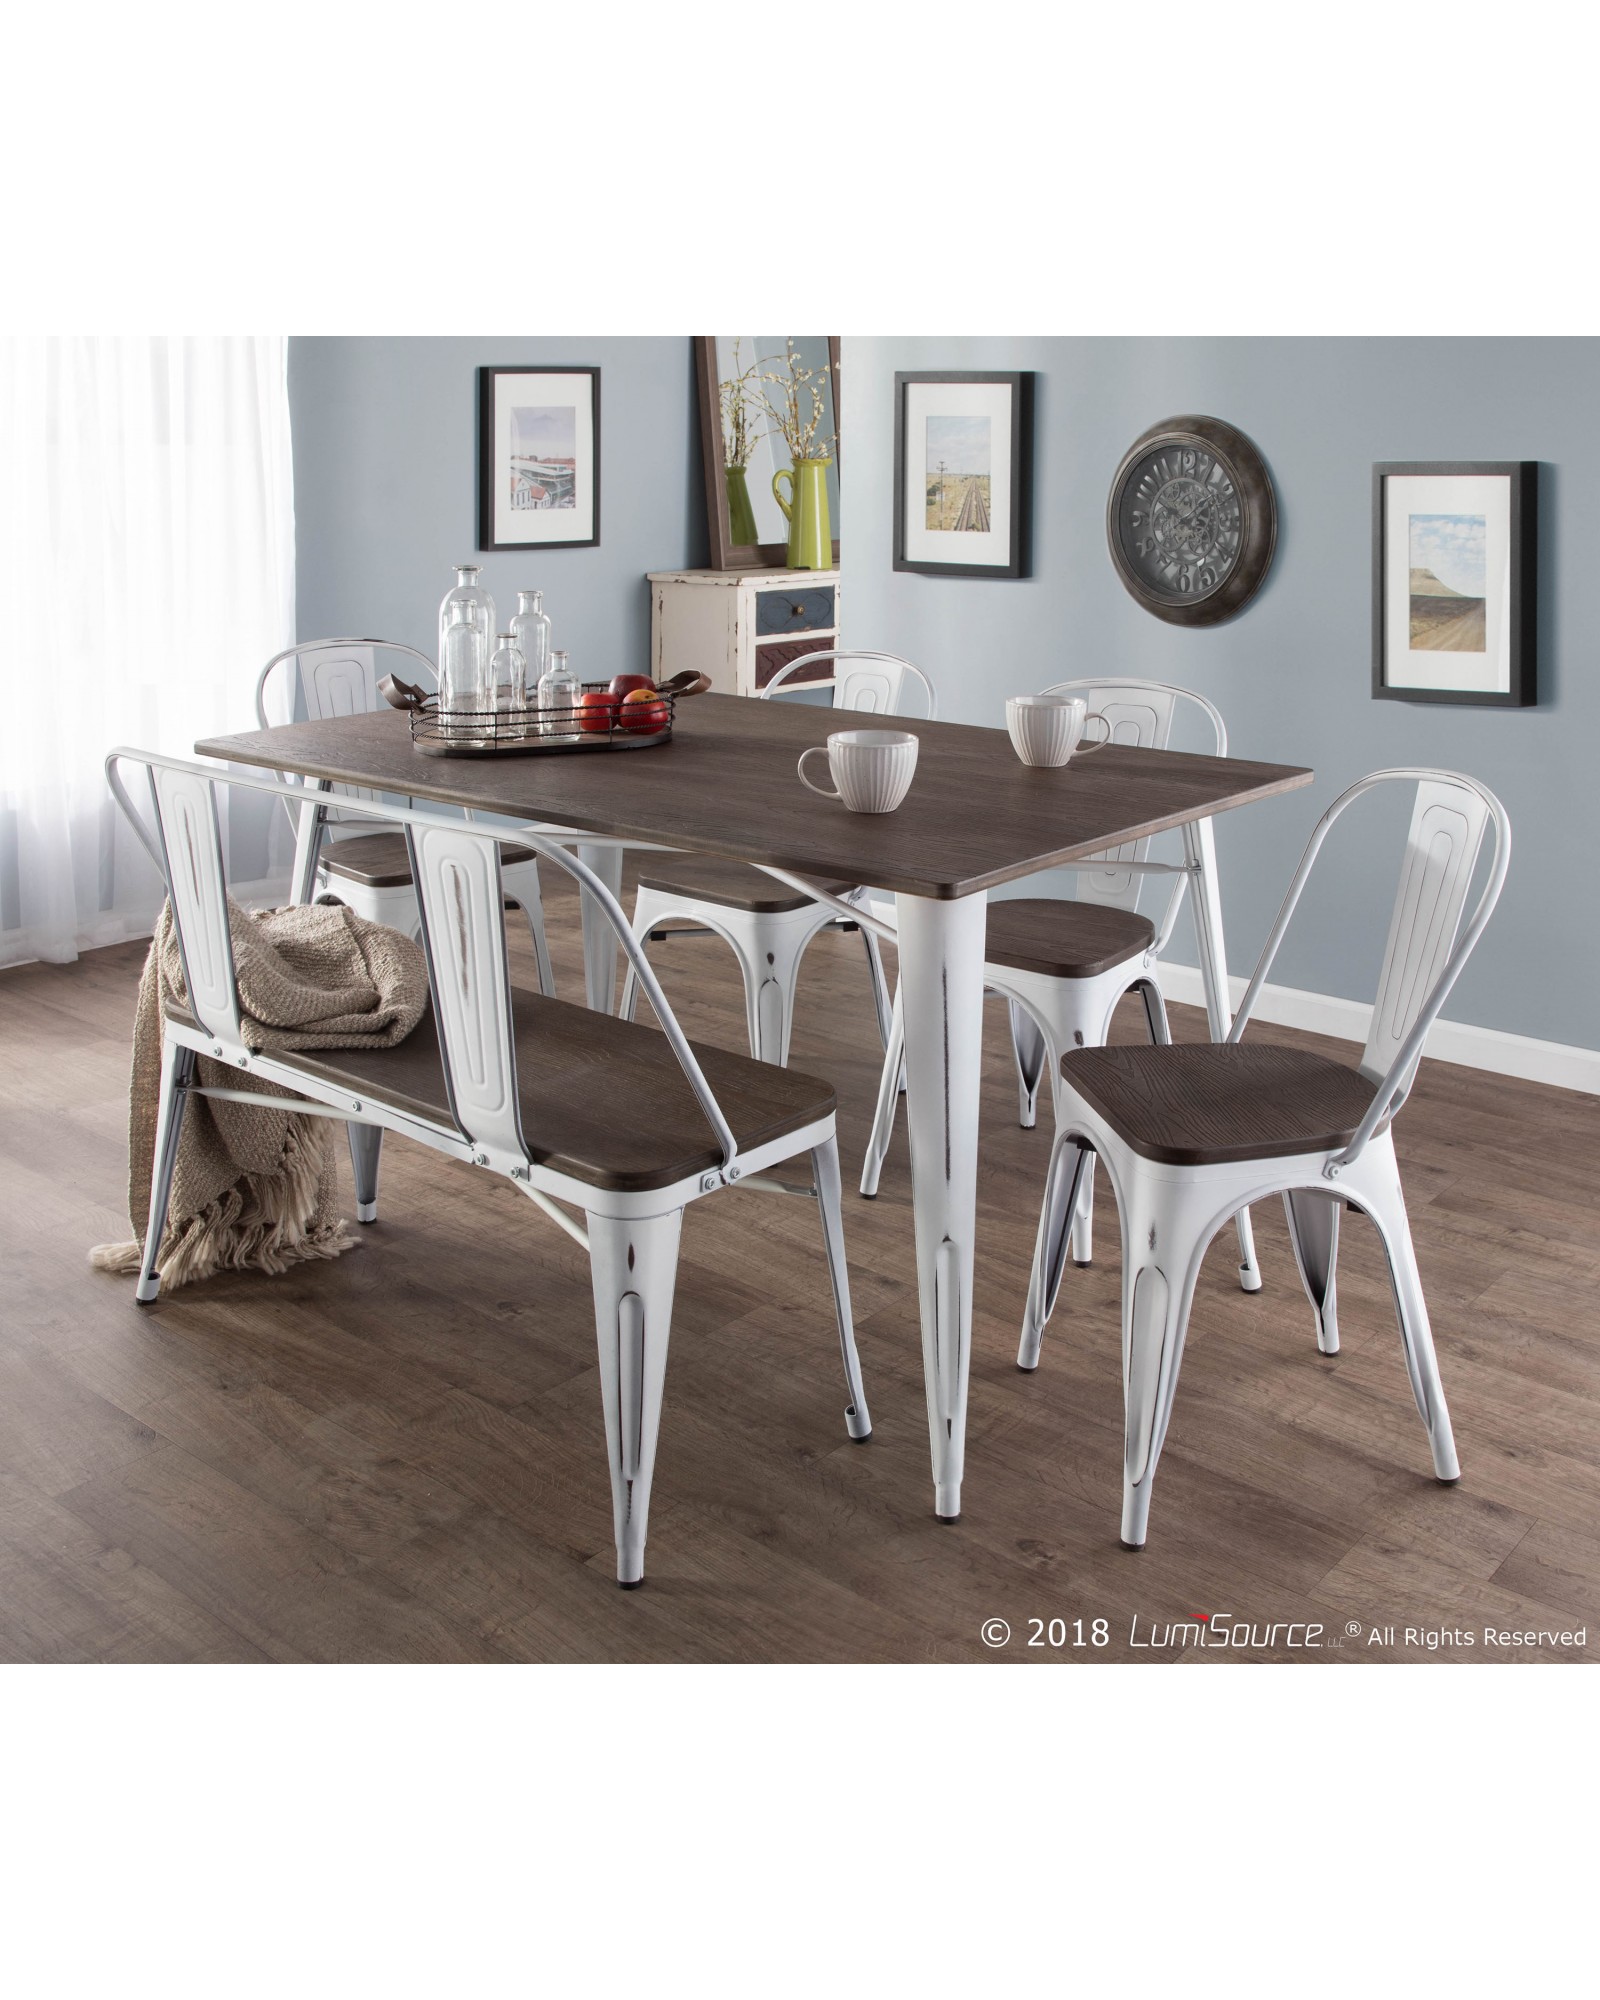 Oregon 6-Piece Industrial-Farmhouse Dining Set in Vintage White and Espresso